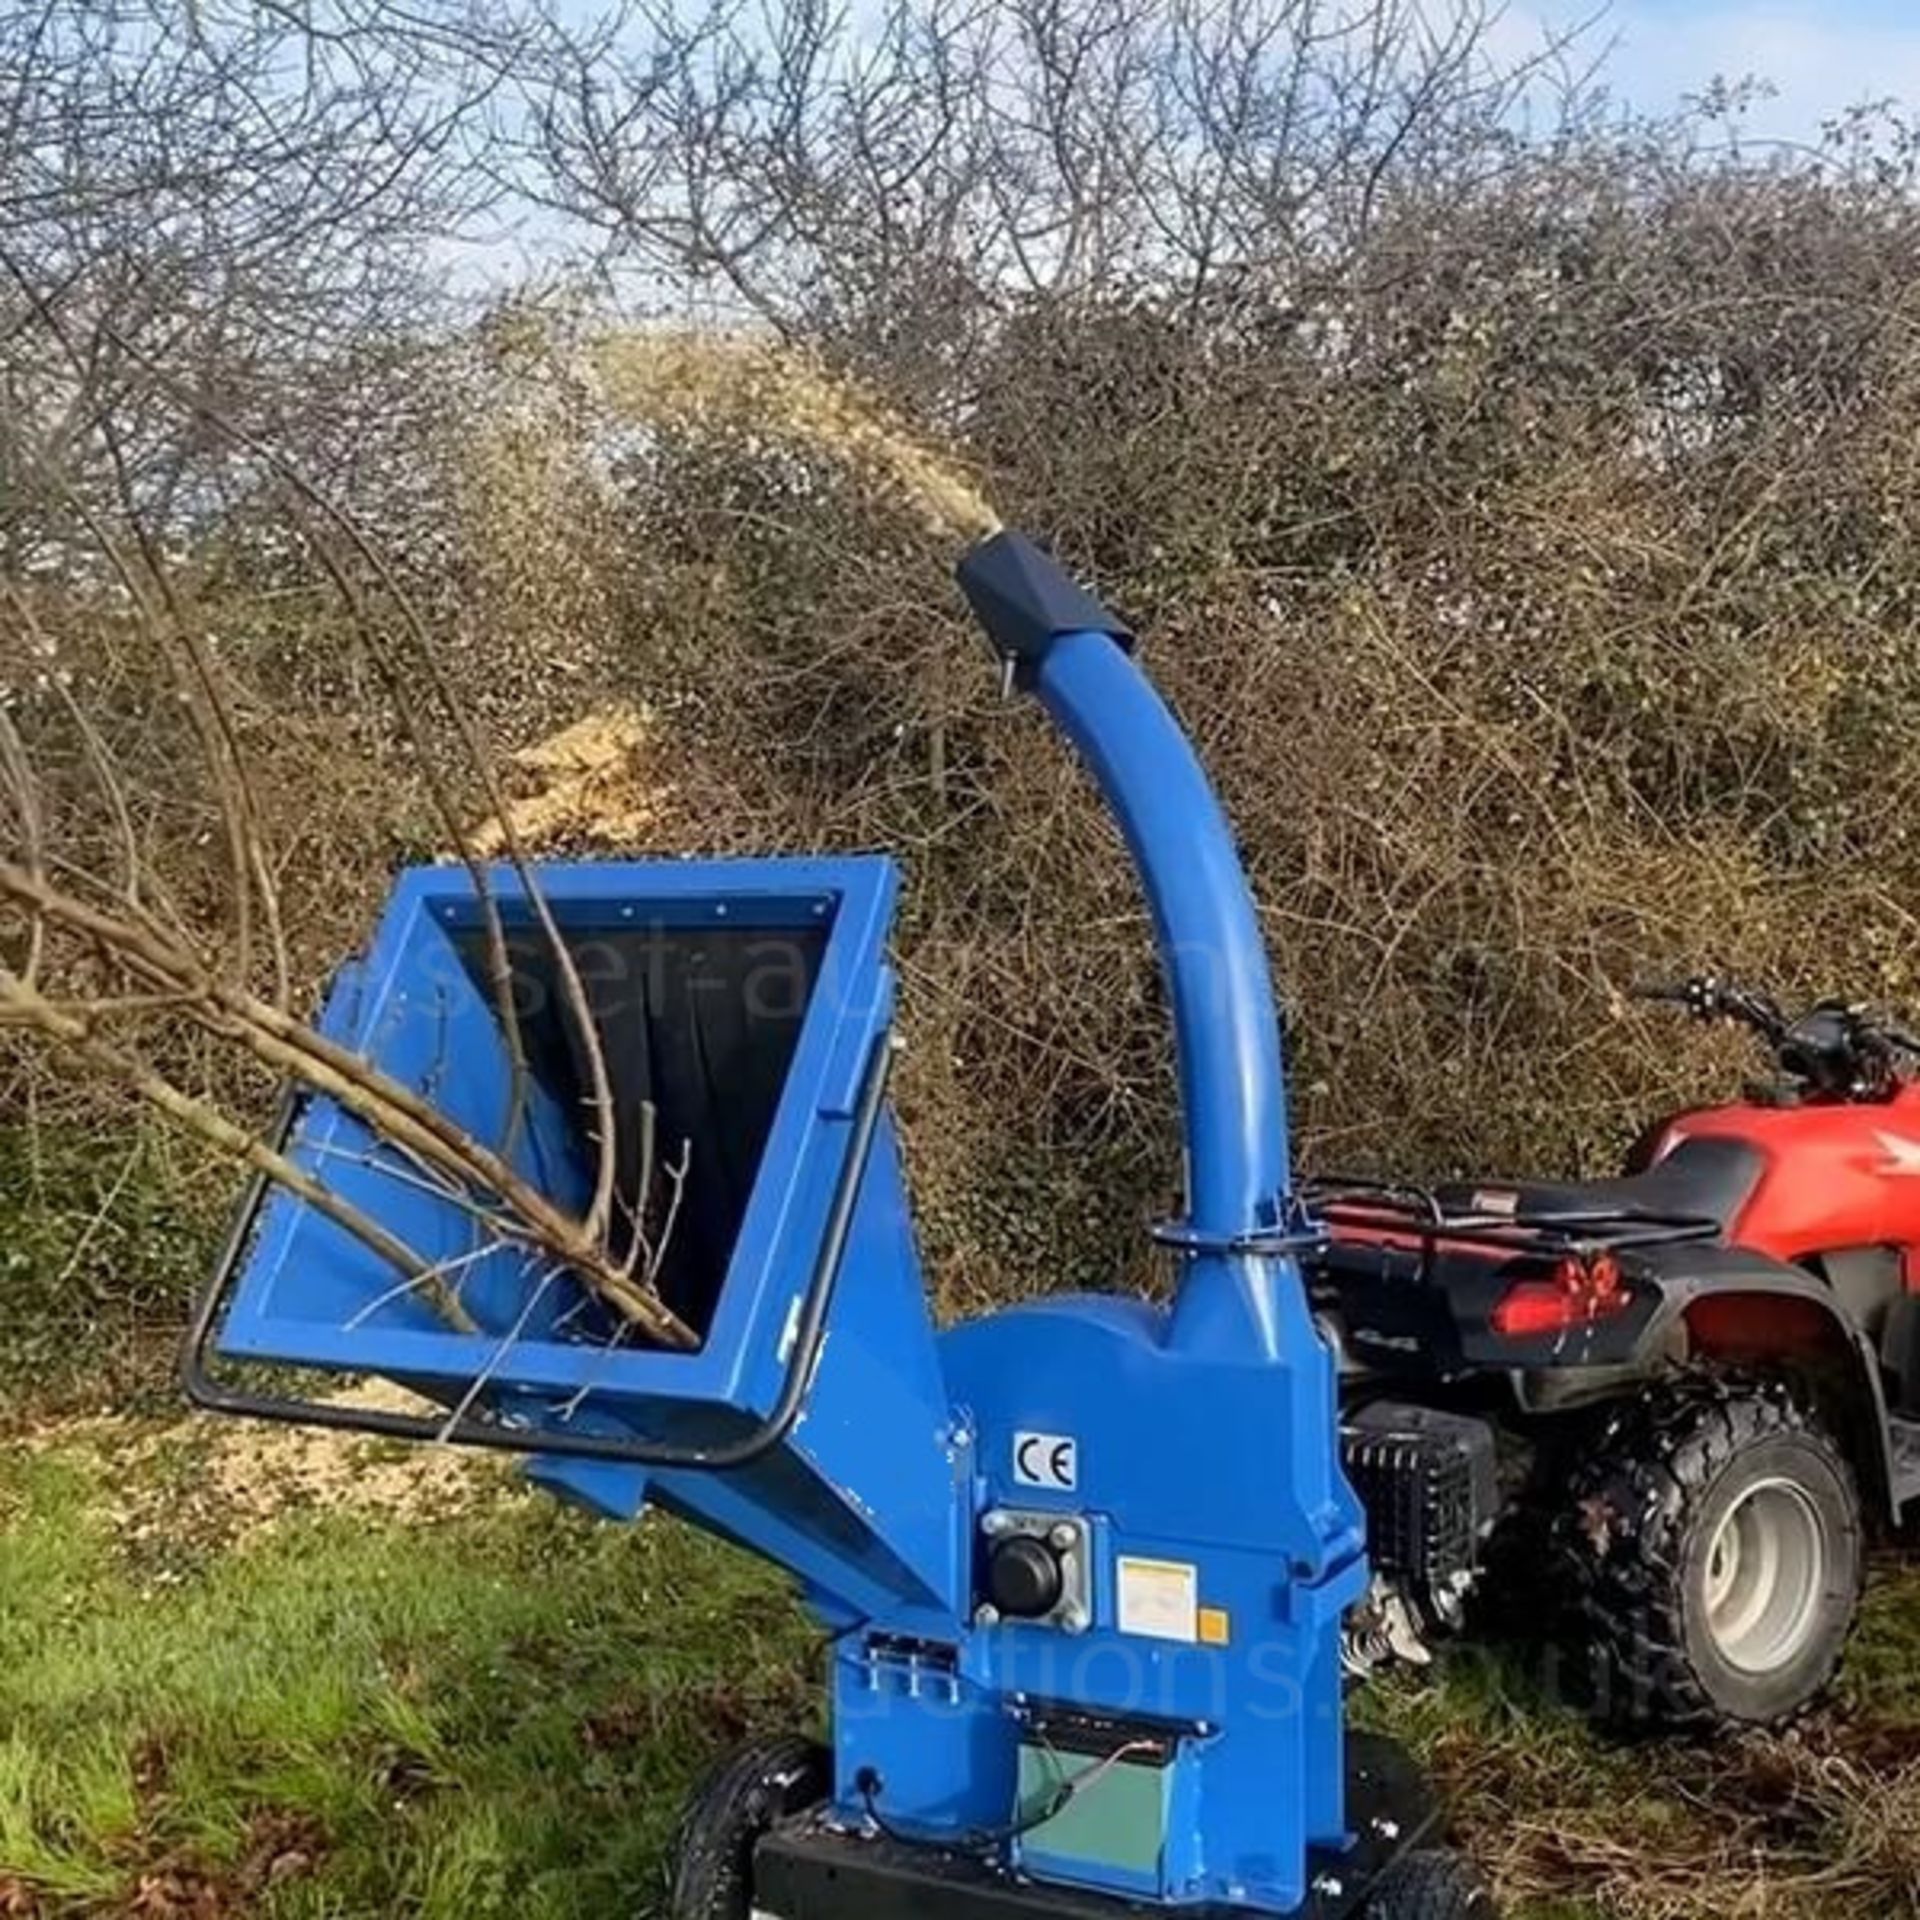 NEW AND UNUSED 15100TE 420cc 4.5" TOWABLE PETROL WOOD CHIPPER, RRP OVER £2400 *PLUS VAT* - Image 10 of 10